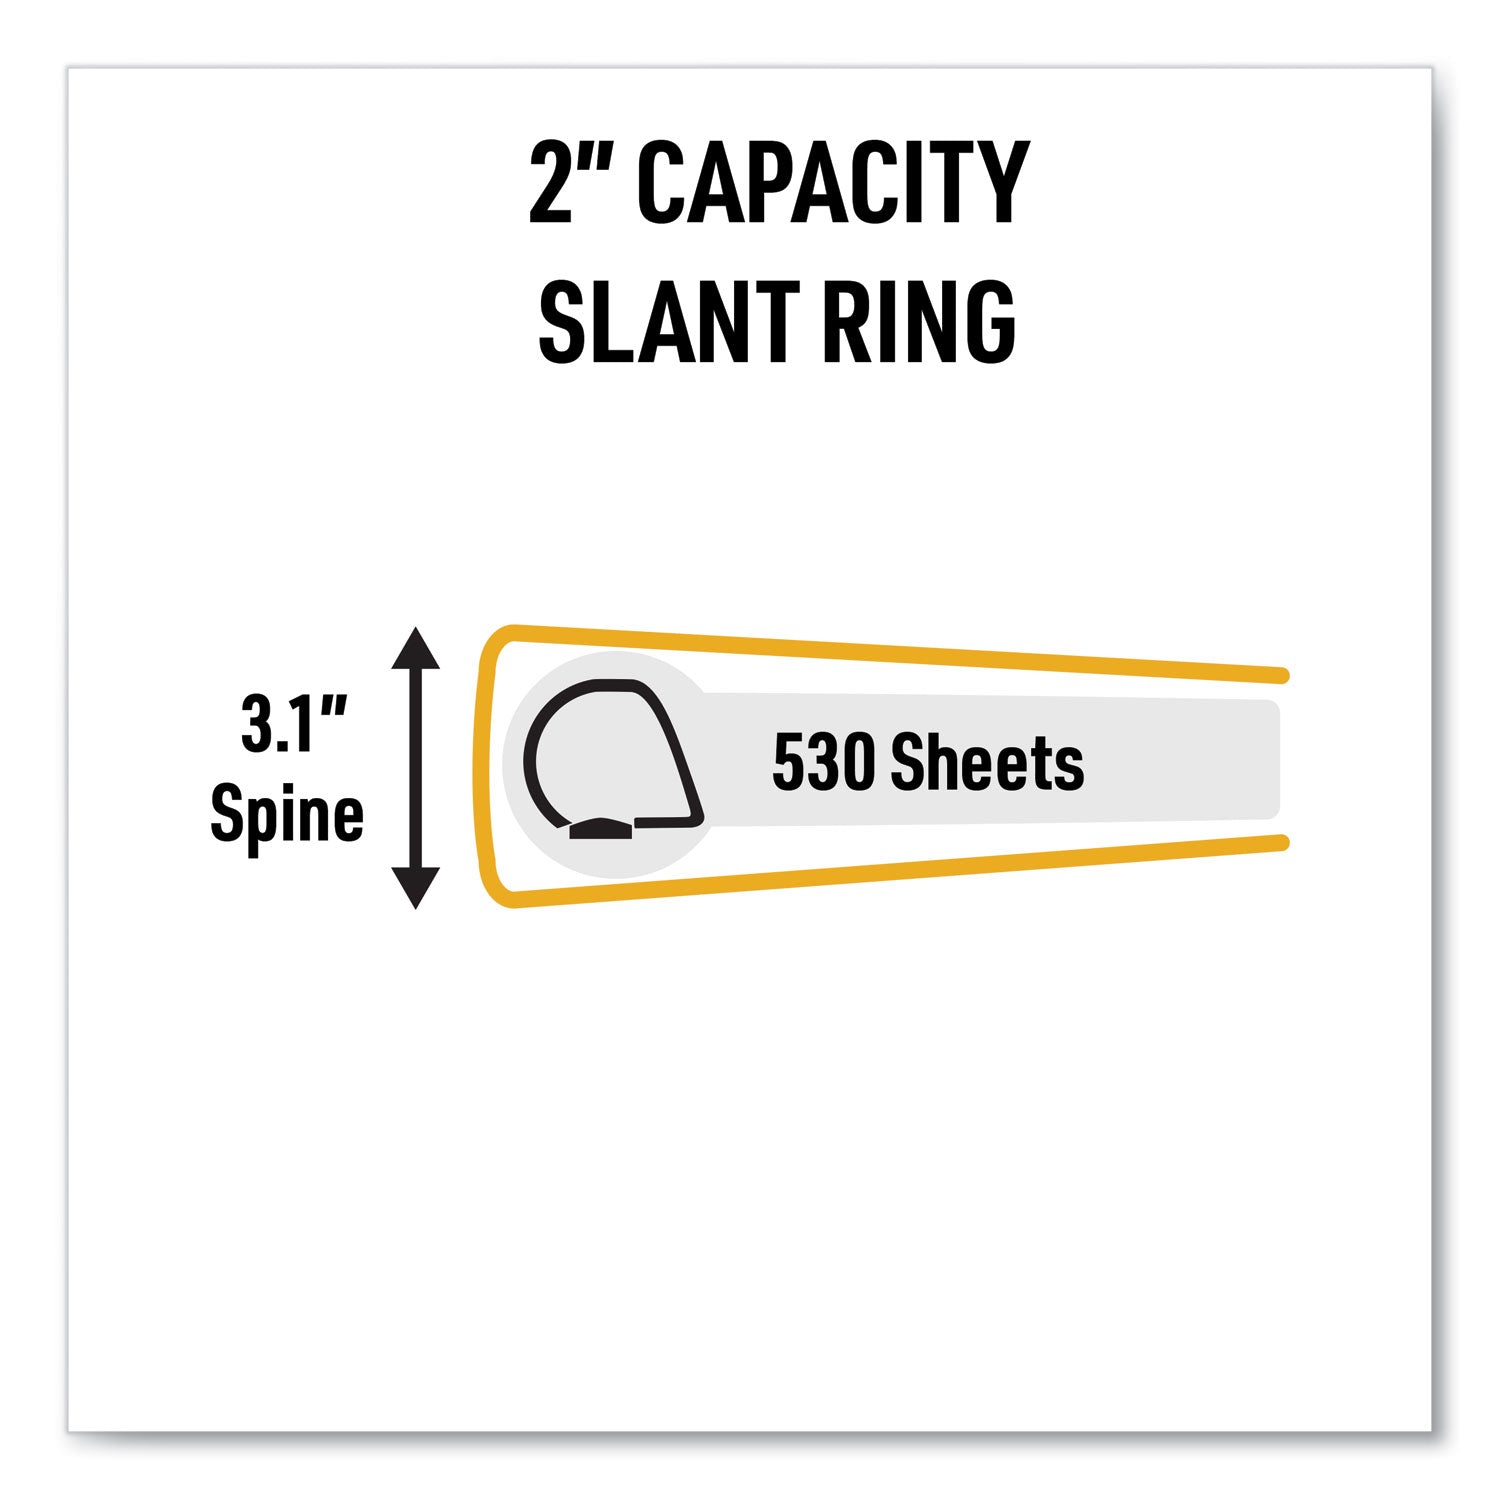 ultraduty-safety-data-sheet-binders-with-chain-3-rings-2-capacity-11-x-85-yellow-red_ave77712 - 6